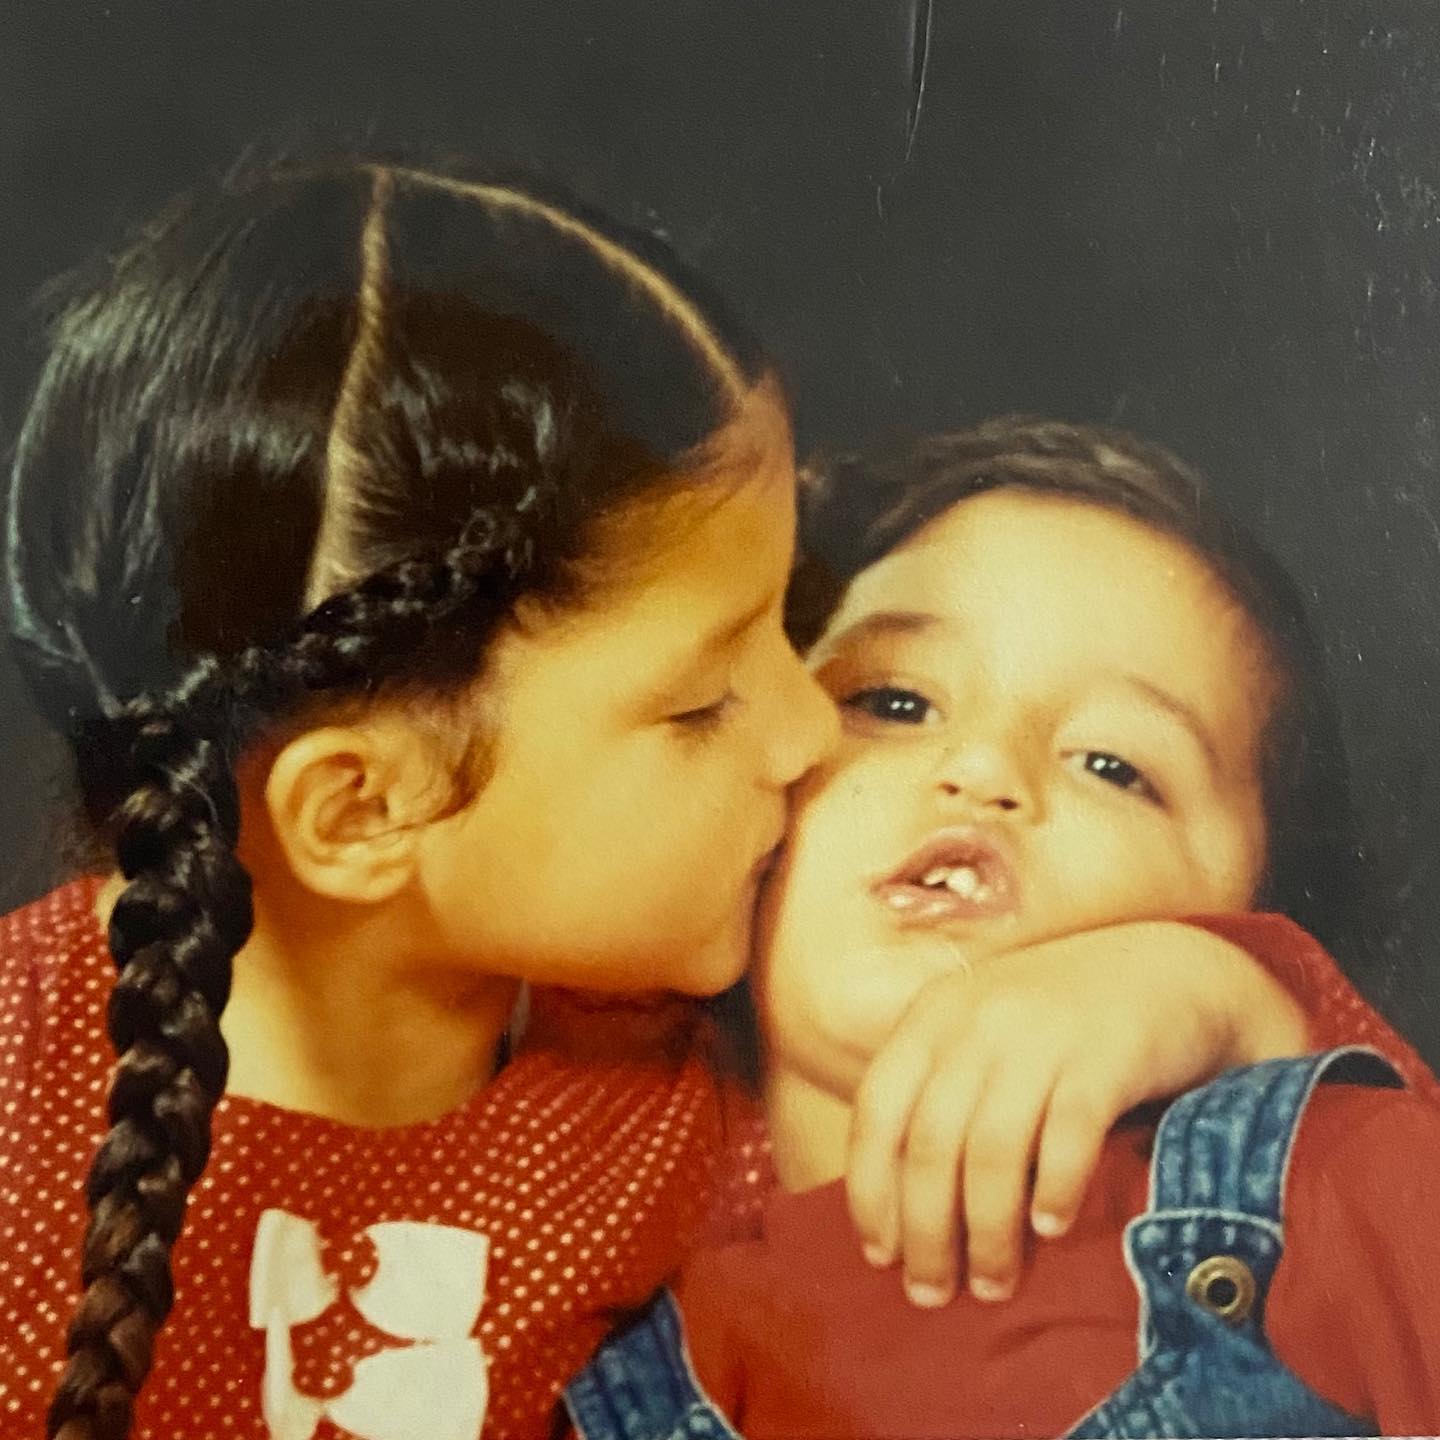 South Indian Actress Mehreen Pirzada with her Younger Brother Gurfateh Singh Pirzada | South Indian Actress Mehreen Pirzada Childhood Photos | Real-Life Photos